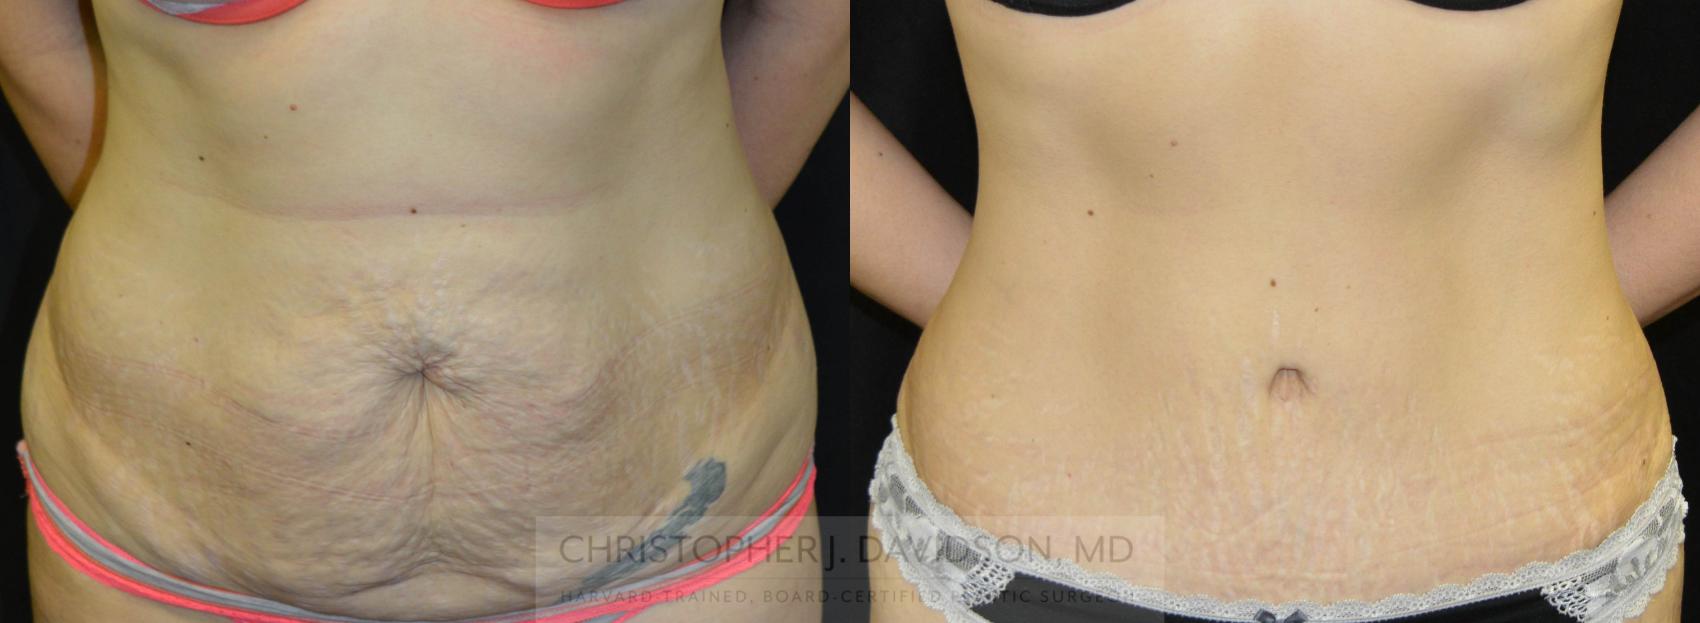 Tummy Tuck (Abdominoplasty) Case 26 Before & After View #1 | Boston, MA | Christopher J. Davidson, MD